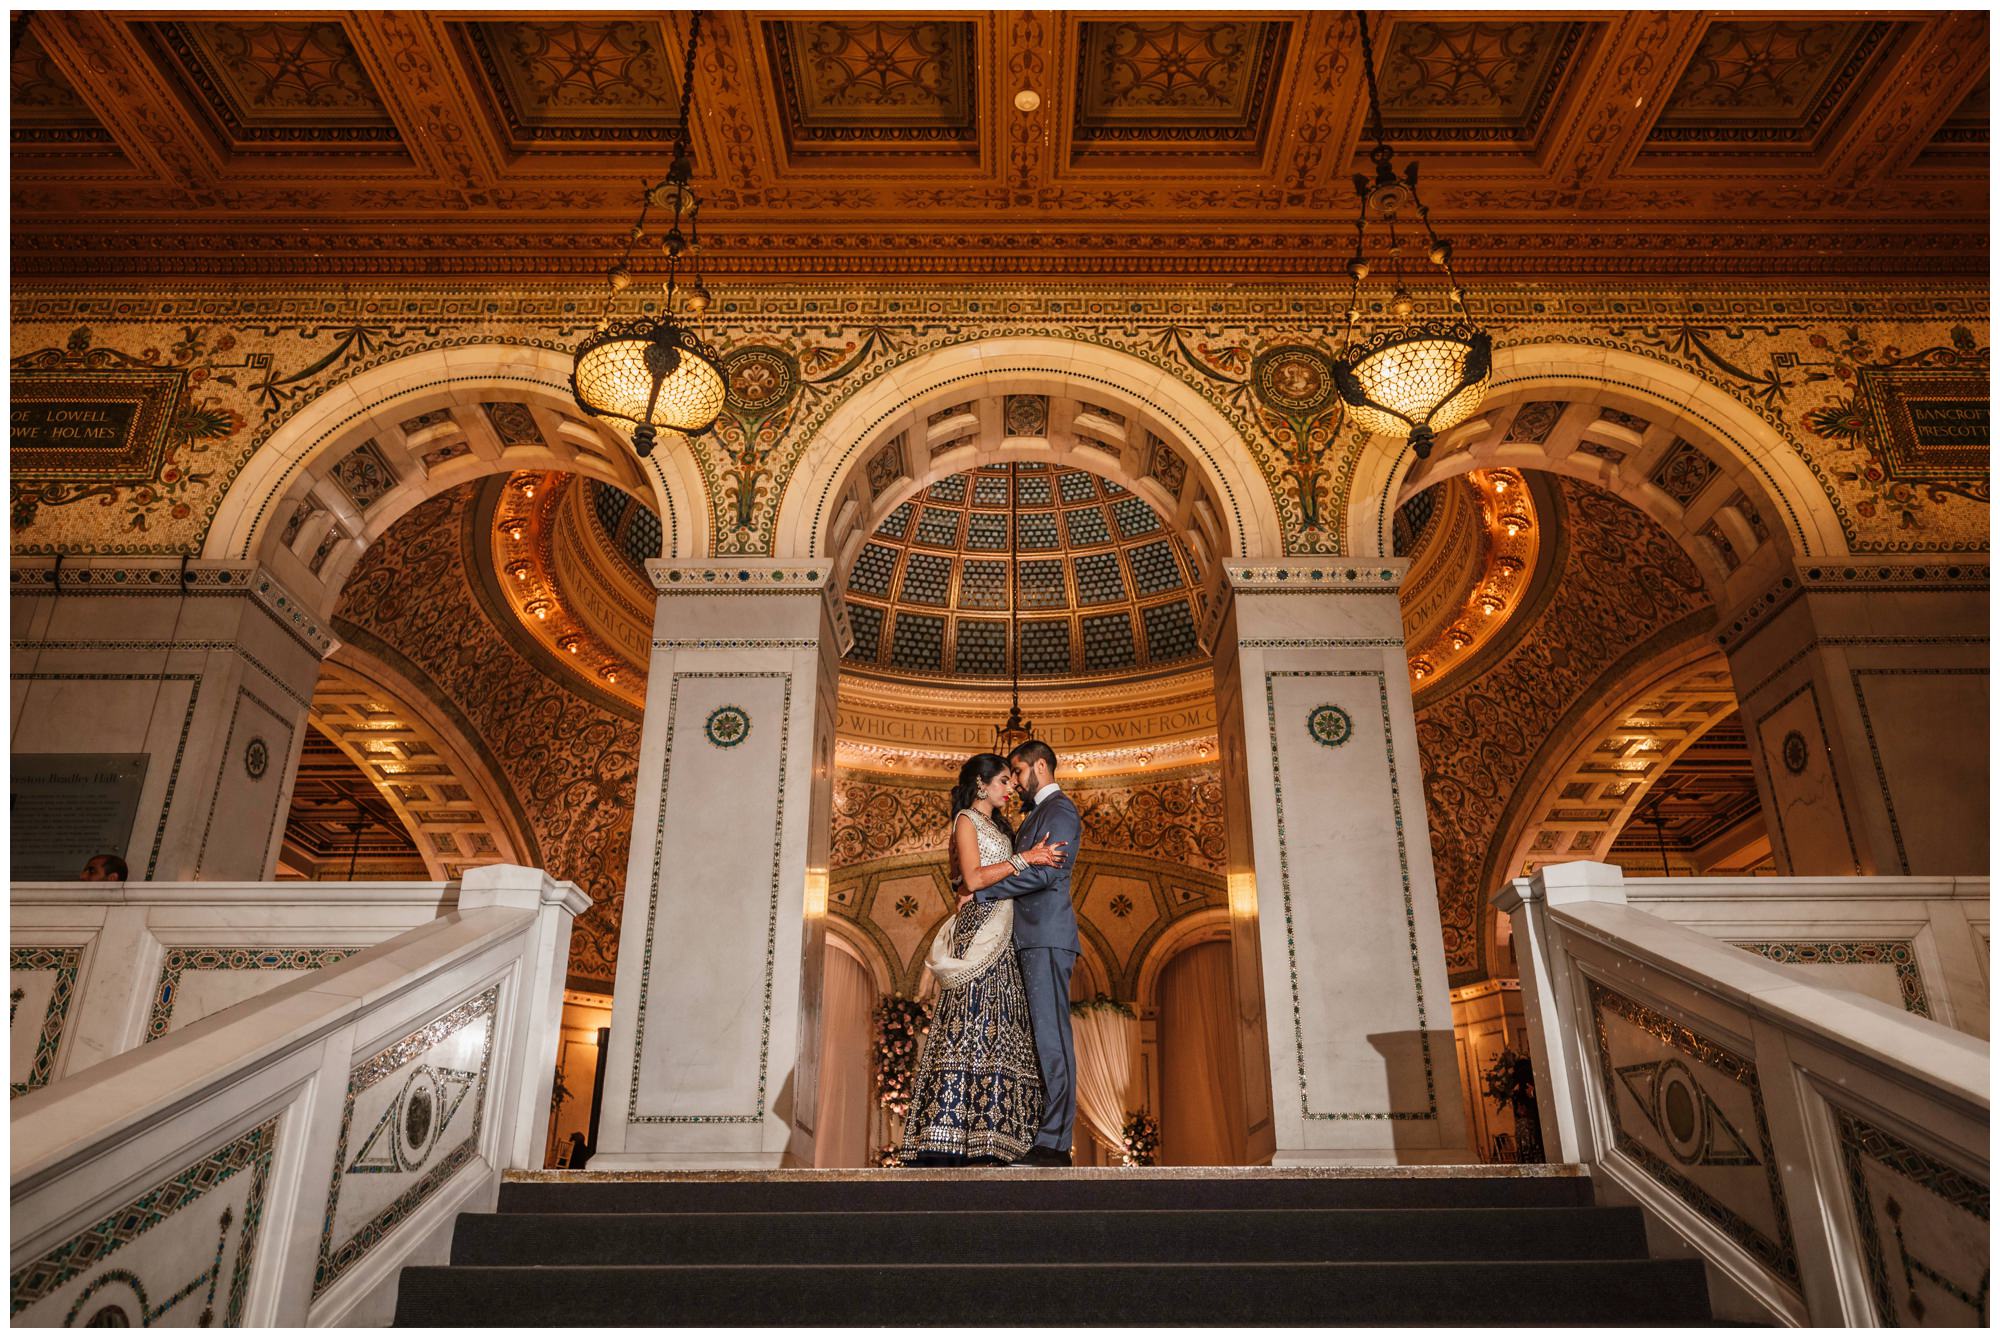 Chicago Cultural Center wedding photographed by The Adamkovi